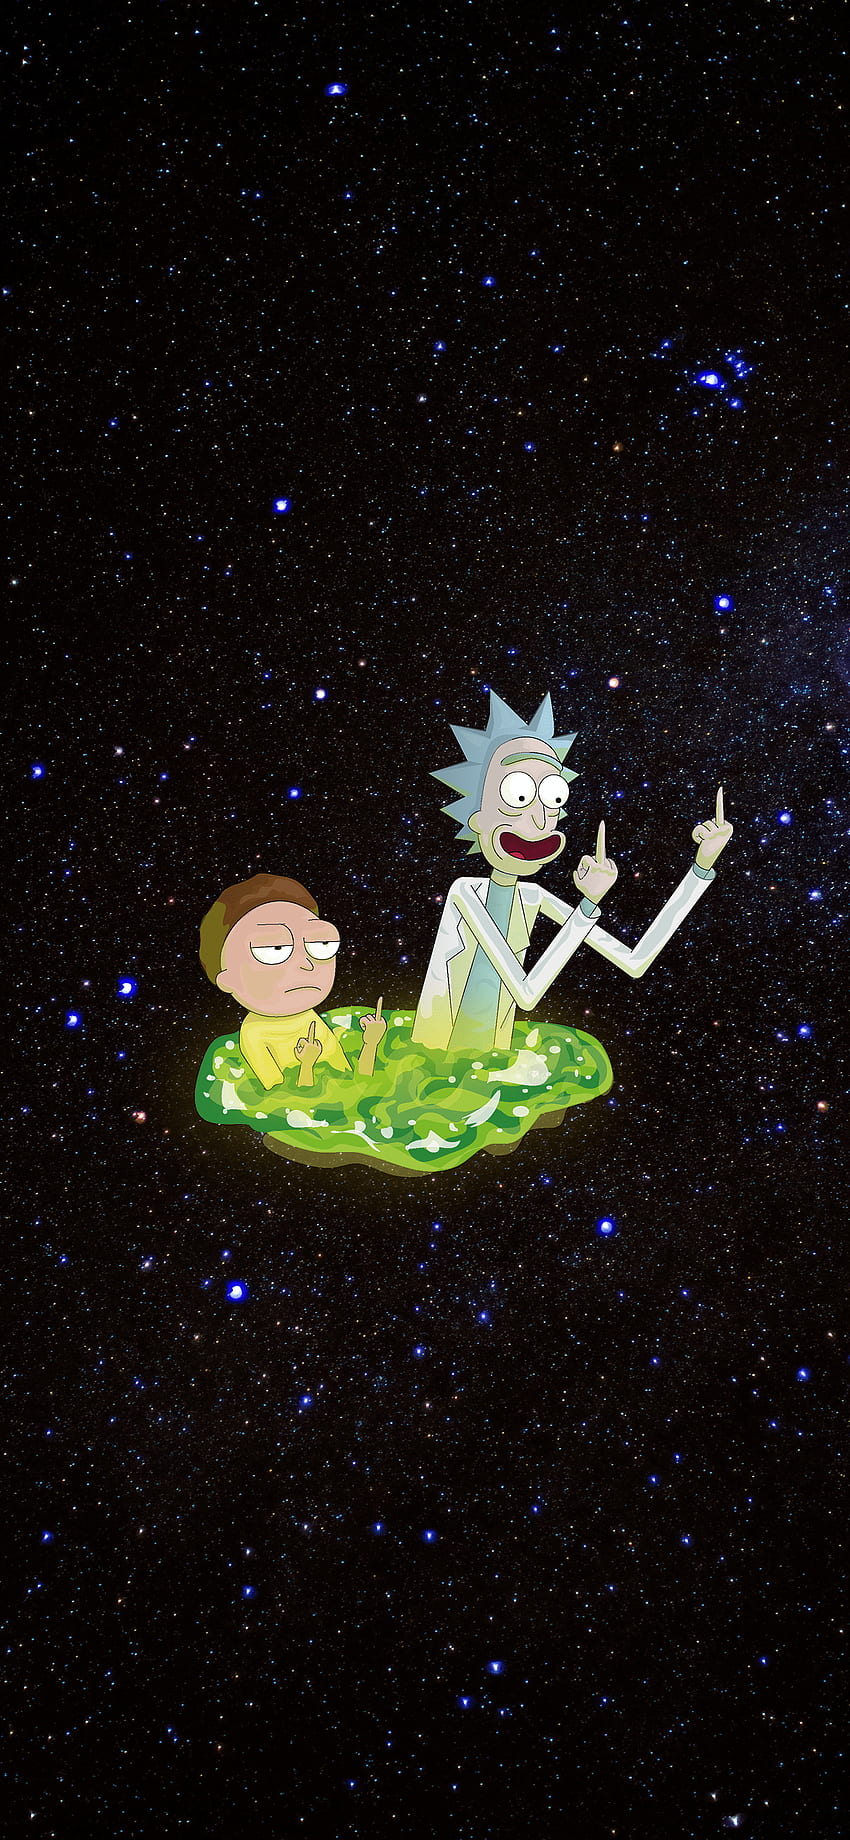 Live wallpaper Rick Morty Breaking Bad Reference 4K / interface